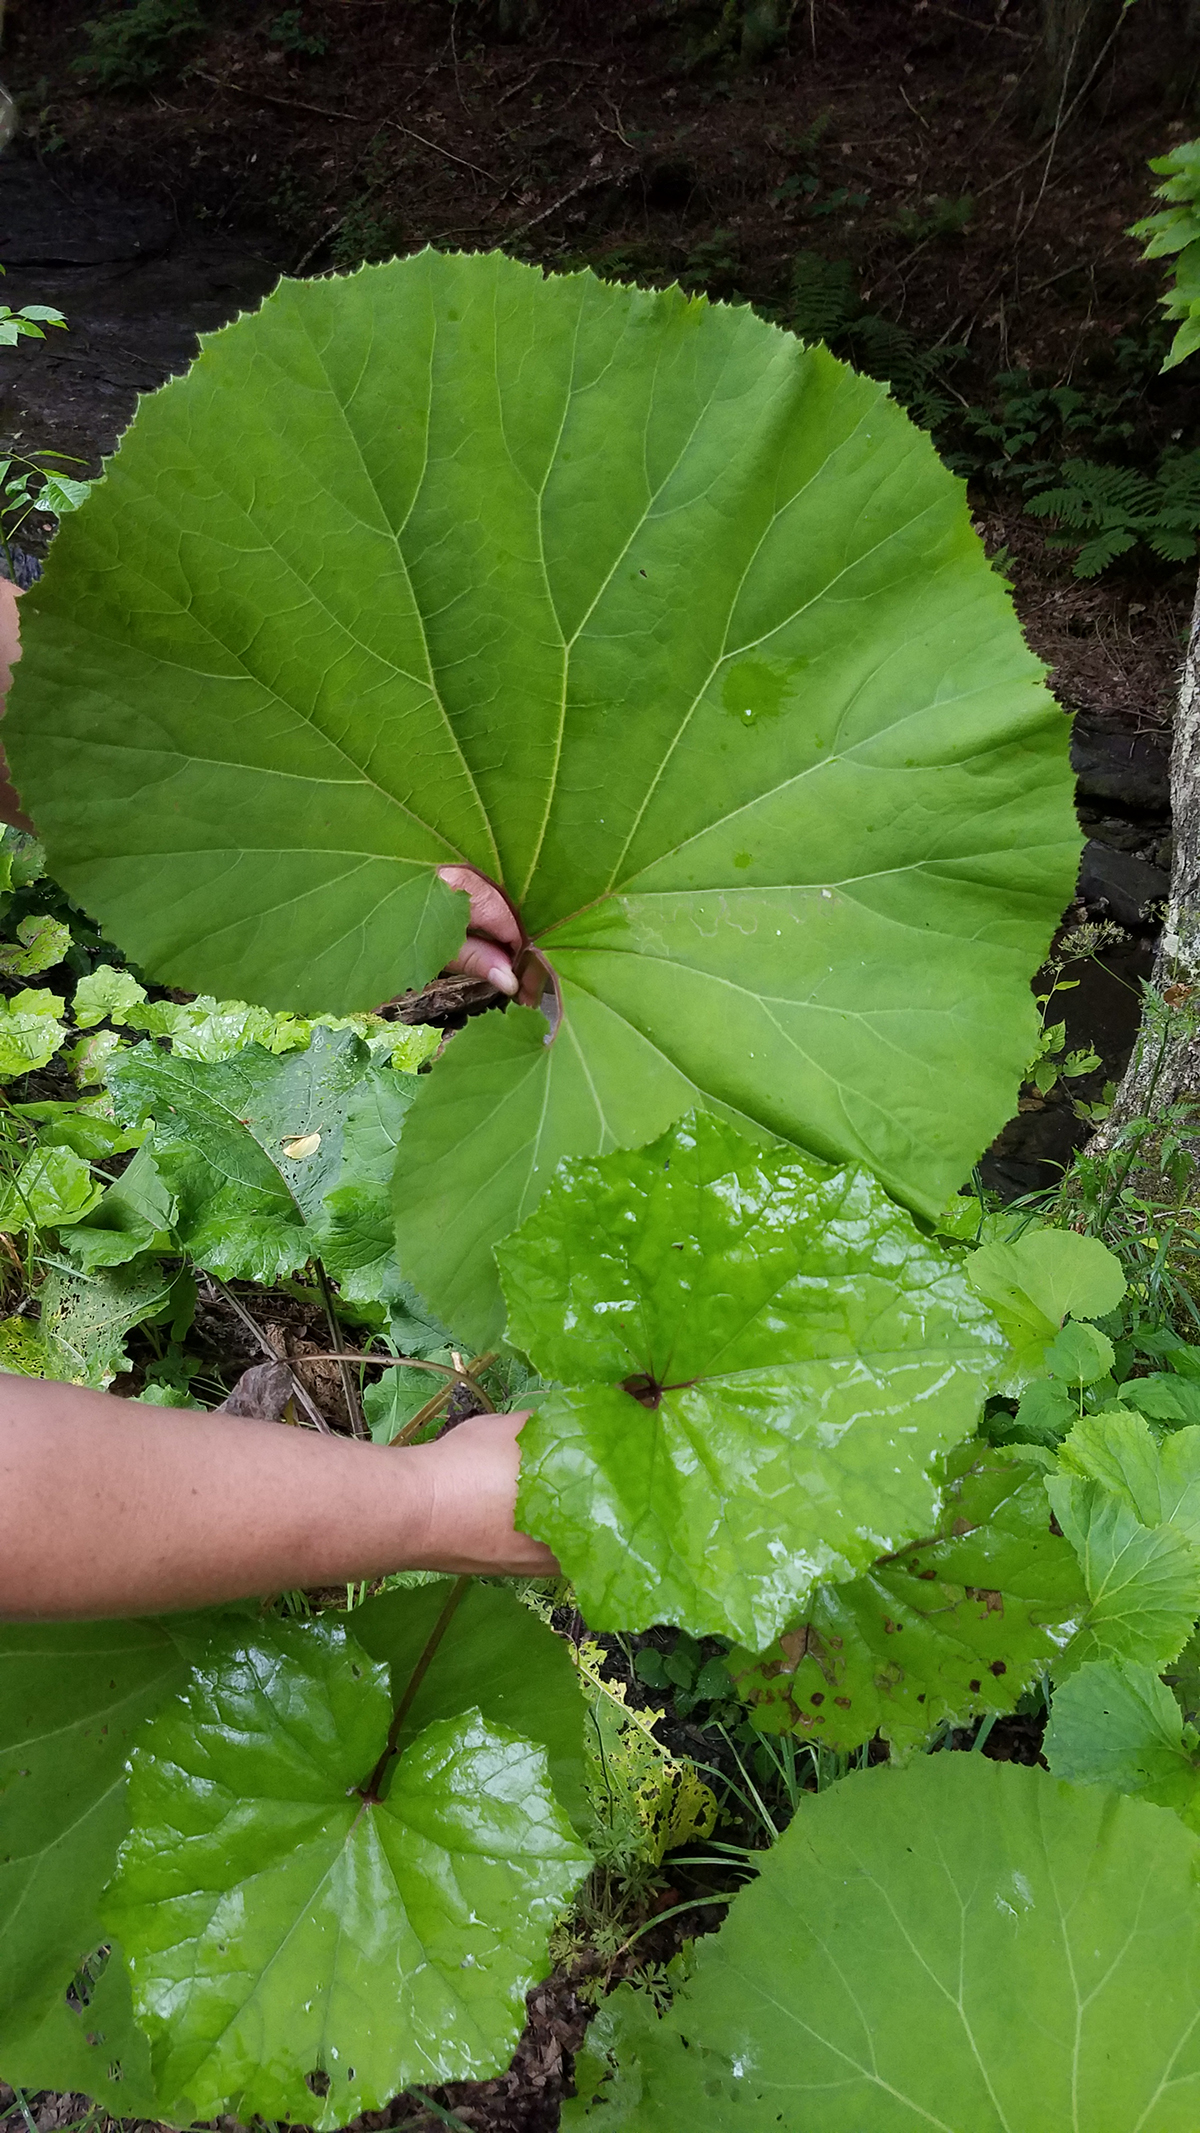 BRAT Director Kelly Stettner shows the difference between common Coltsfoot leaves and the much larger invasive Japanese butterbur